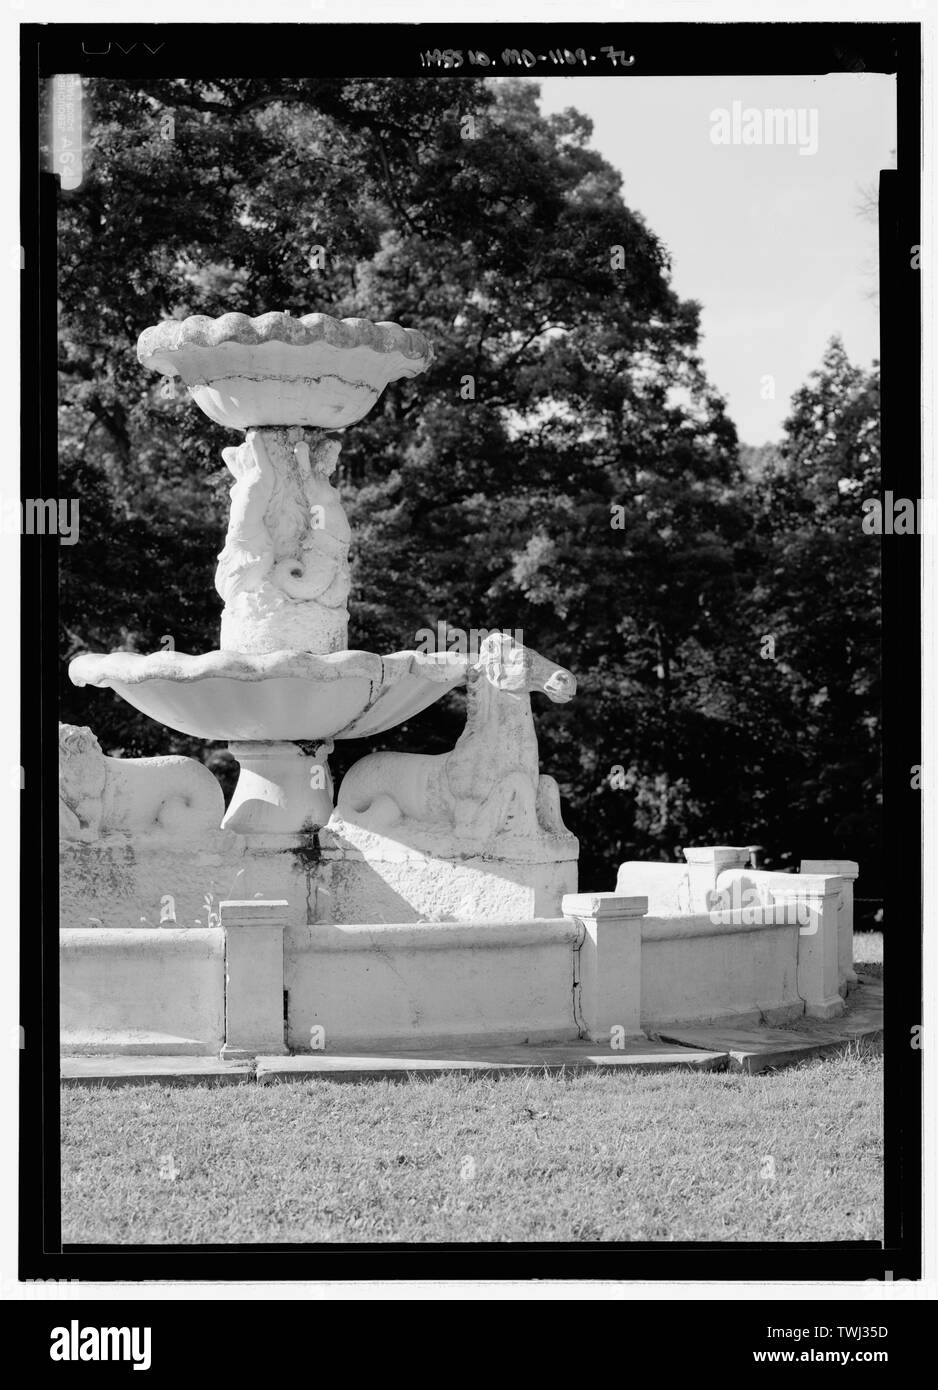 Sculpture, close view of the marble fountain - National Park Seminary, Bounded by Capitol Beltway (I-495), Linden Lane, Woodstove Avenue, and Smith Drive, Silver Spring, Montgomery County, MD; U.S.Department of the Army; Ray, Arthur; Cassedy, John Irving, A; Ament, James E; Davis, Roy Tasco; Holman, Emily Elizabeth; Schneider, Thomas Franklin; Rosenthal, James, field team; Price, Virginia B, transmitter; Ott, Cynthia, historian; Boucher, Jack E, photographer; Lavoie, Catherine C, project manager; Price, Virginia B, transmitter; Price, Virginia B, transmitter Stock Photo